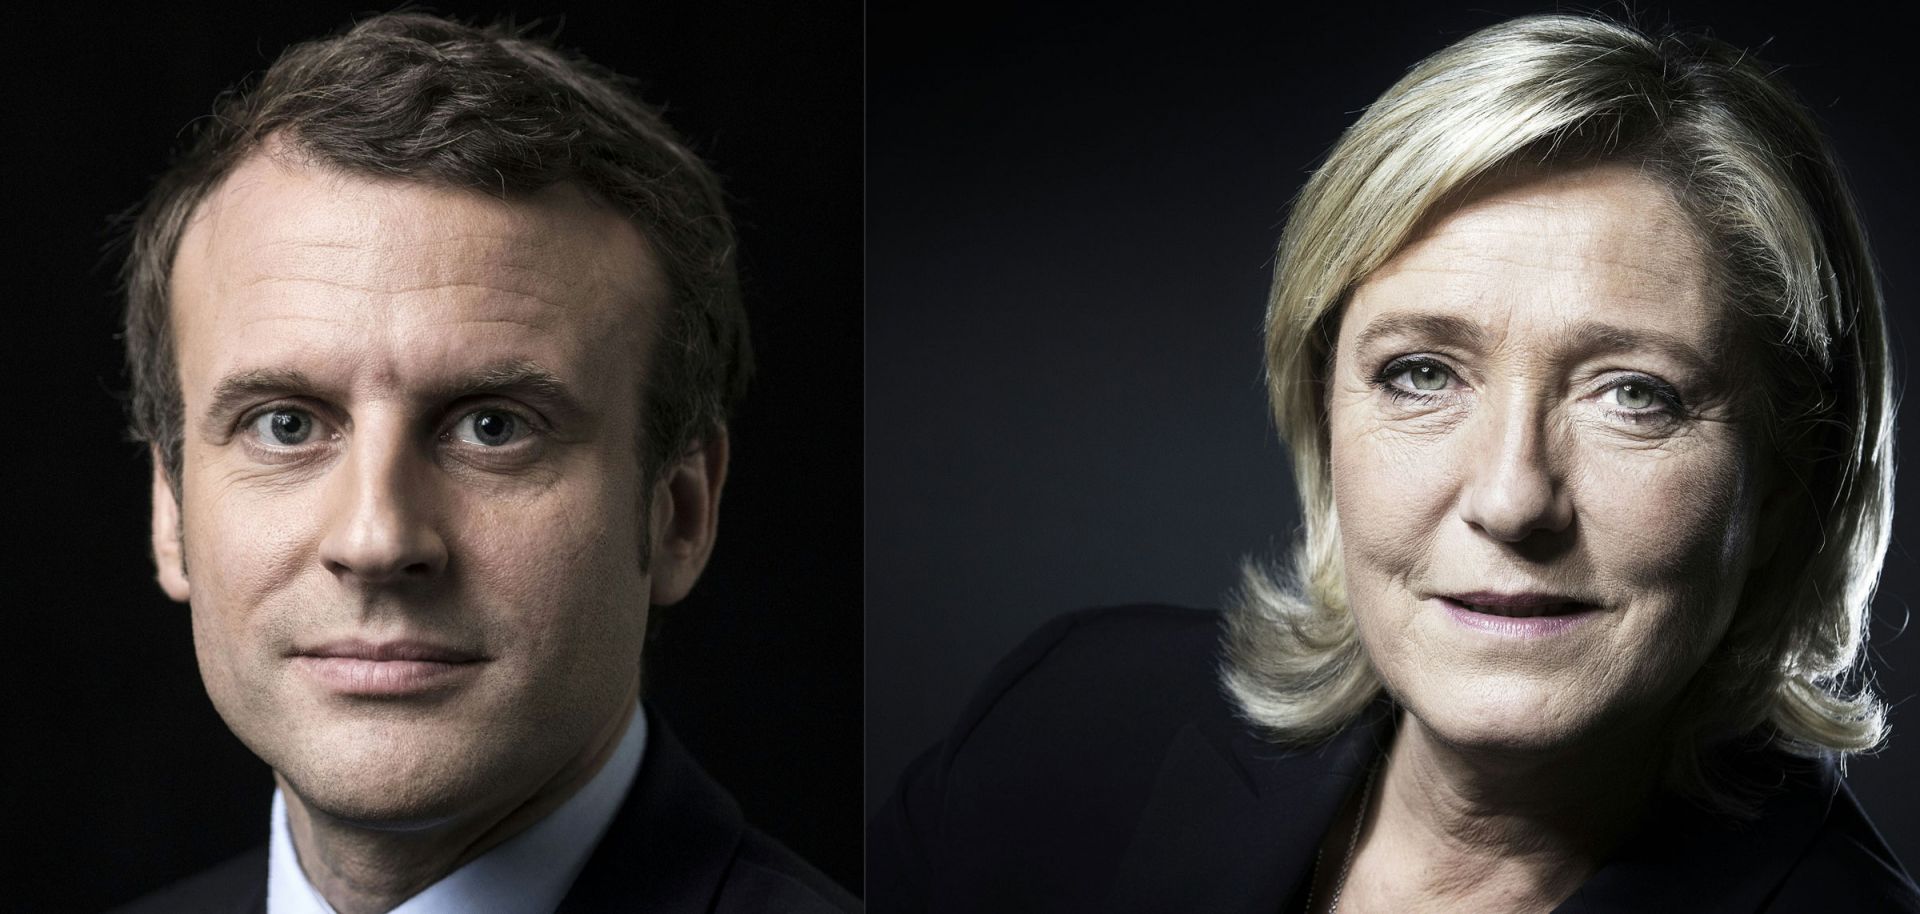 The scenario Brussels most feared did not come to fruition in the first round of France's presidential election. But the country's political situation offers little room for complacency.